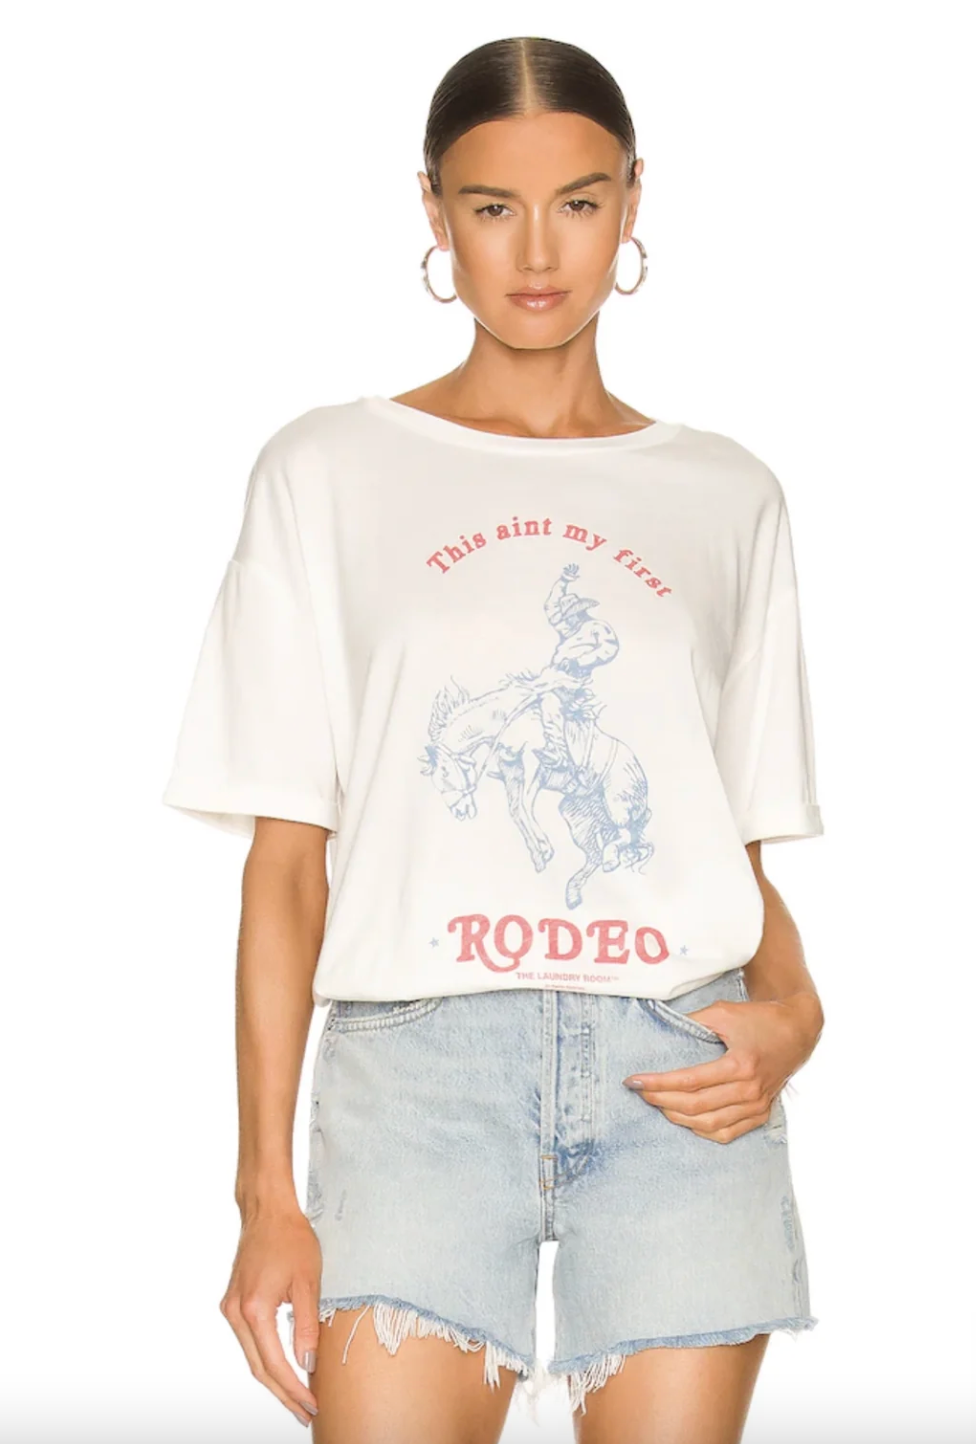 First Rodeo Tee